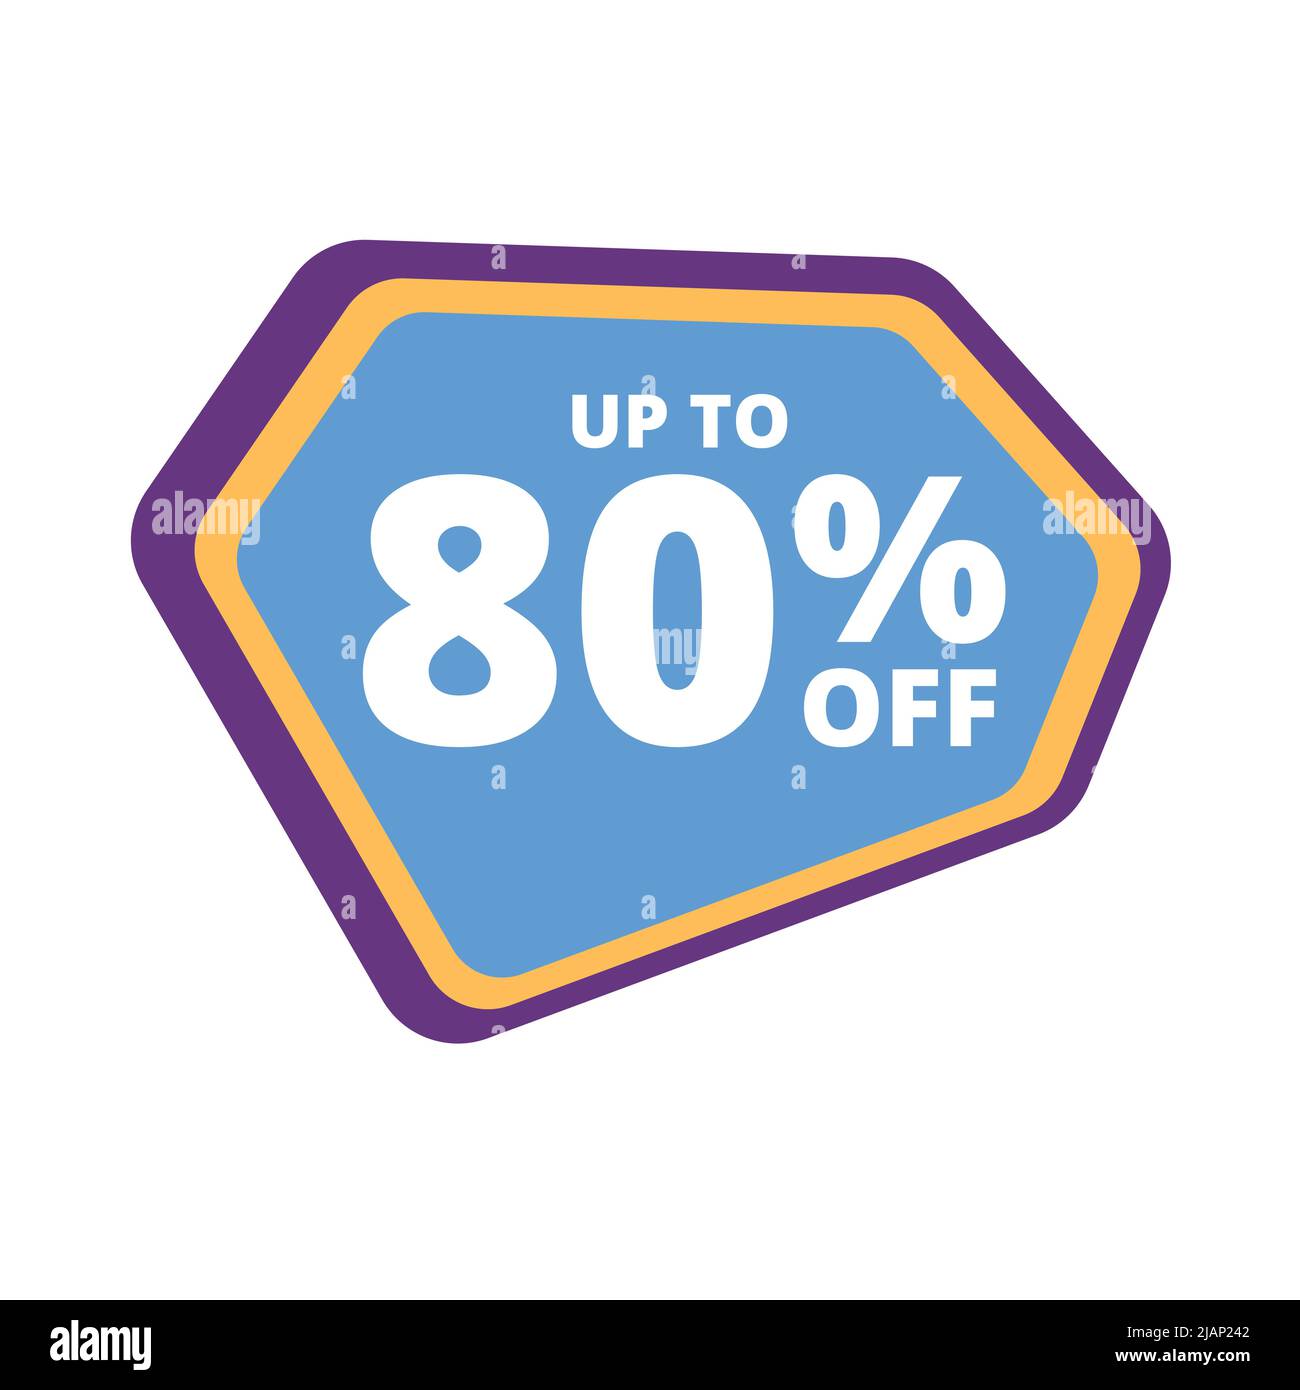 Up to 80 percentage off special offer. Vector colorful sale banner, discount, sticker, sign, icon, label. Hot offer coupon up to 80 percentage off Stock Vector